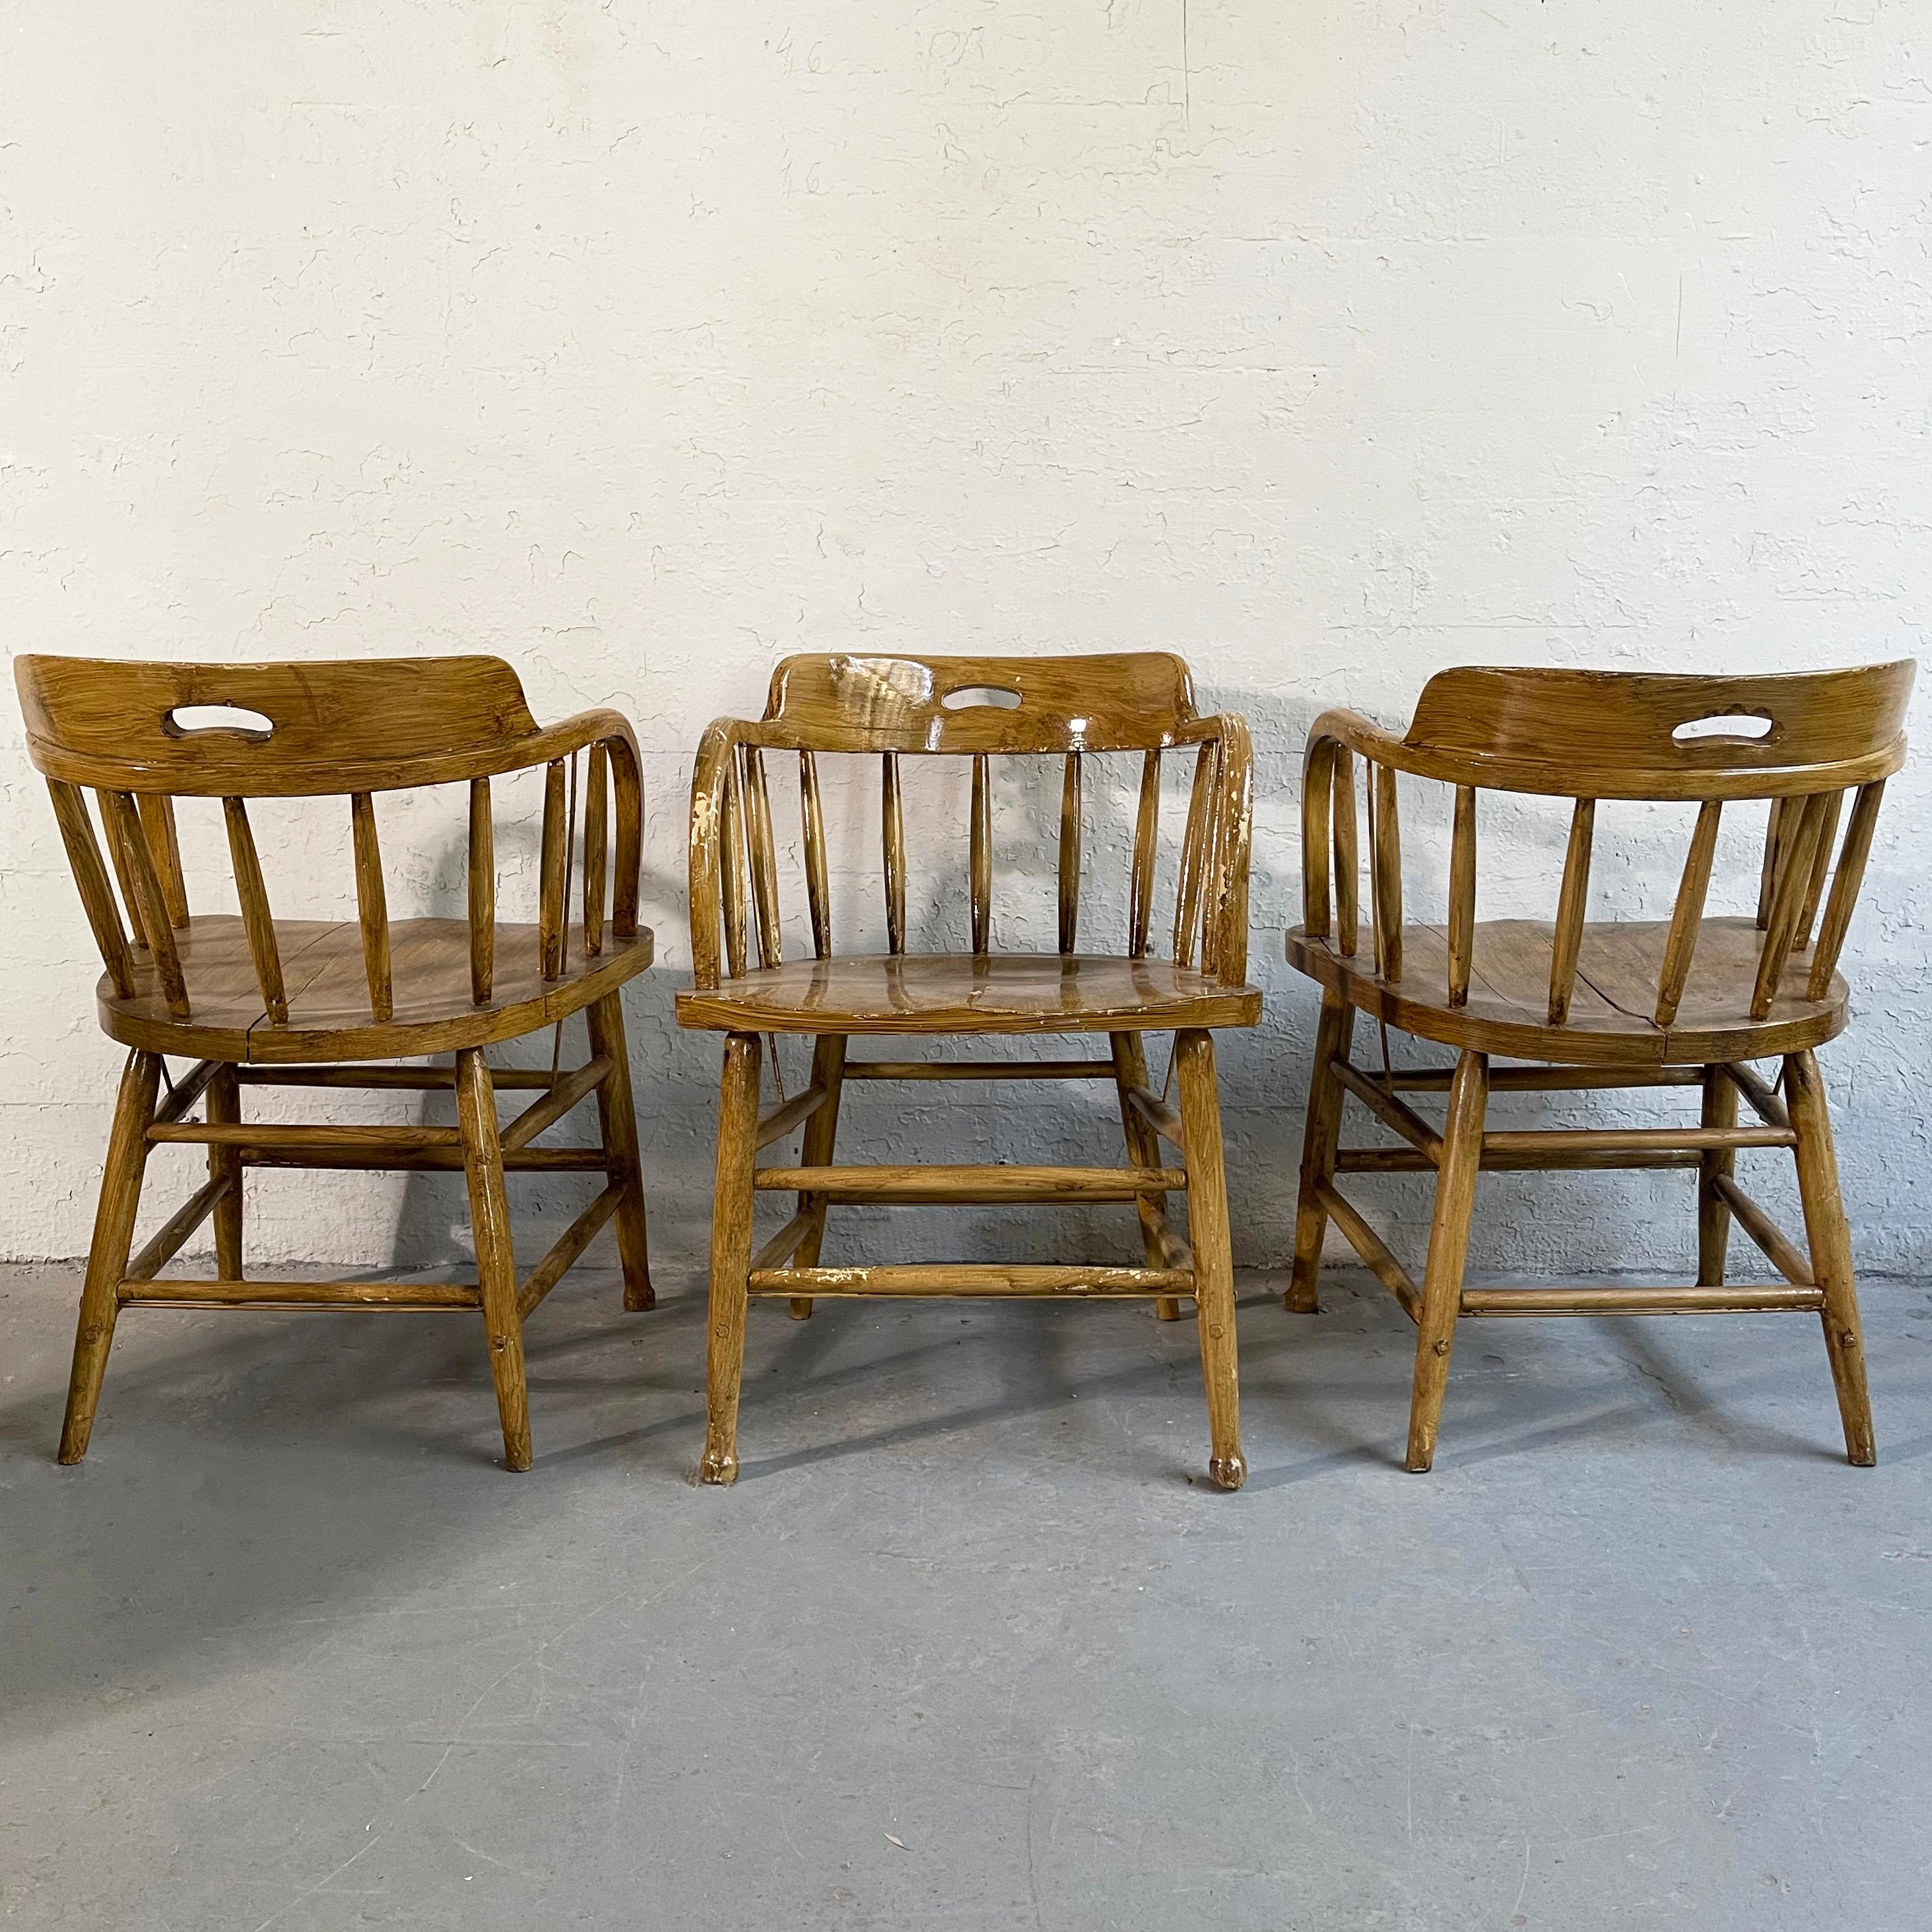 Early 20th Century, Rustic Oak Firehouse Dining Chairs 2